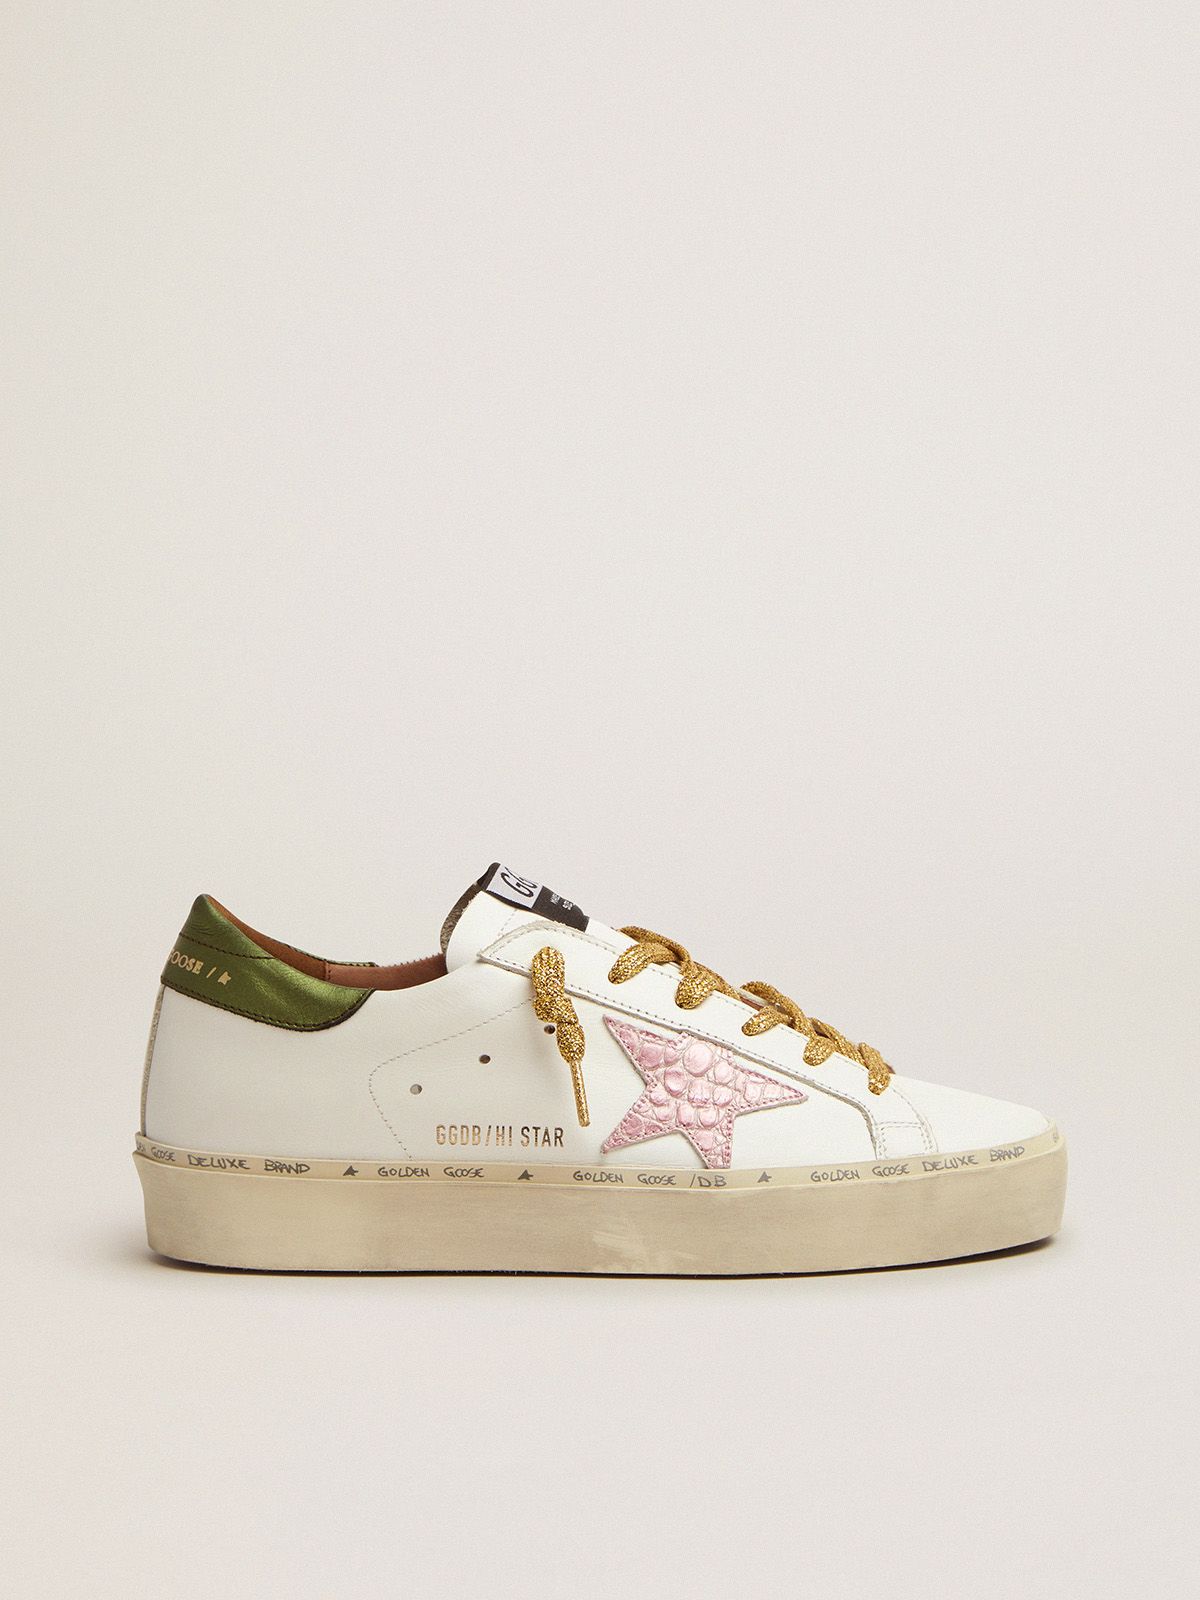 golden goose laminated tab heel pink crocodile-print with leather Star Hi star green and sneakers